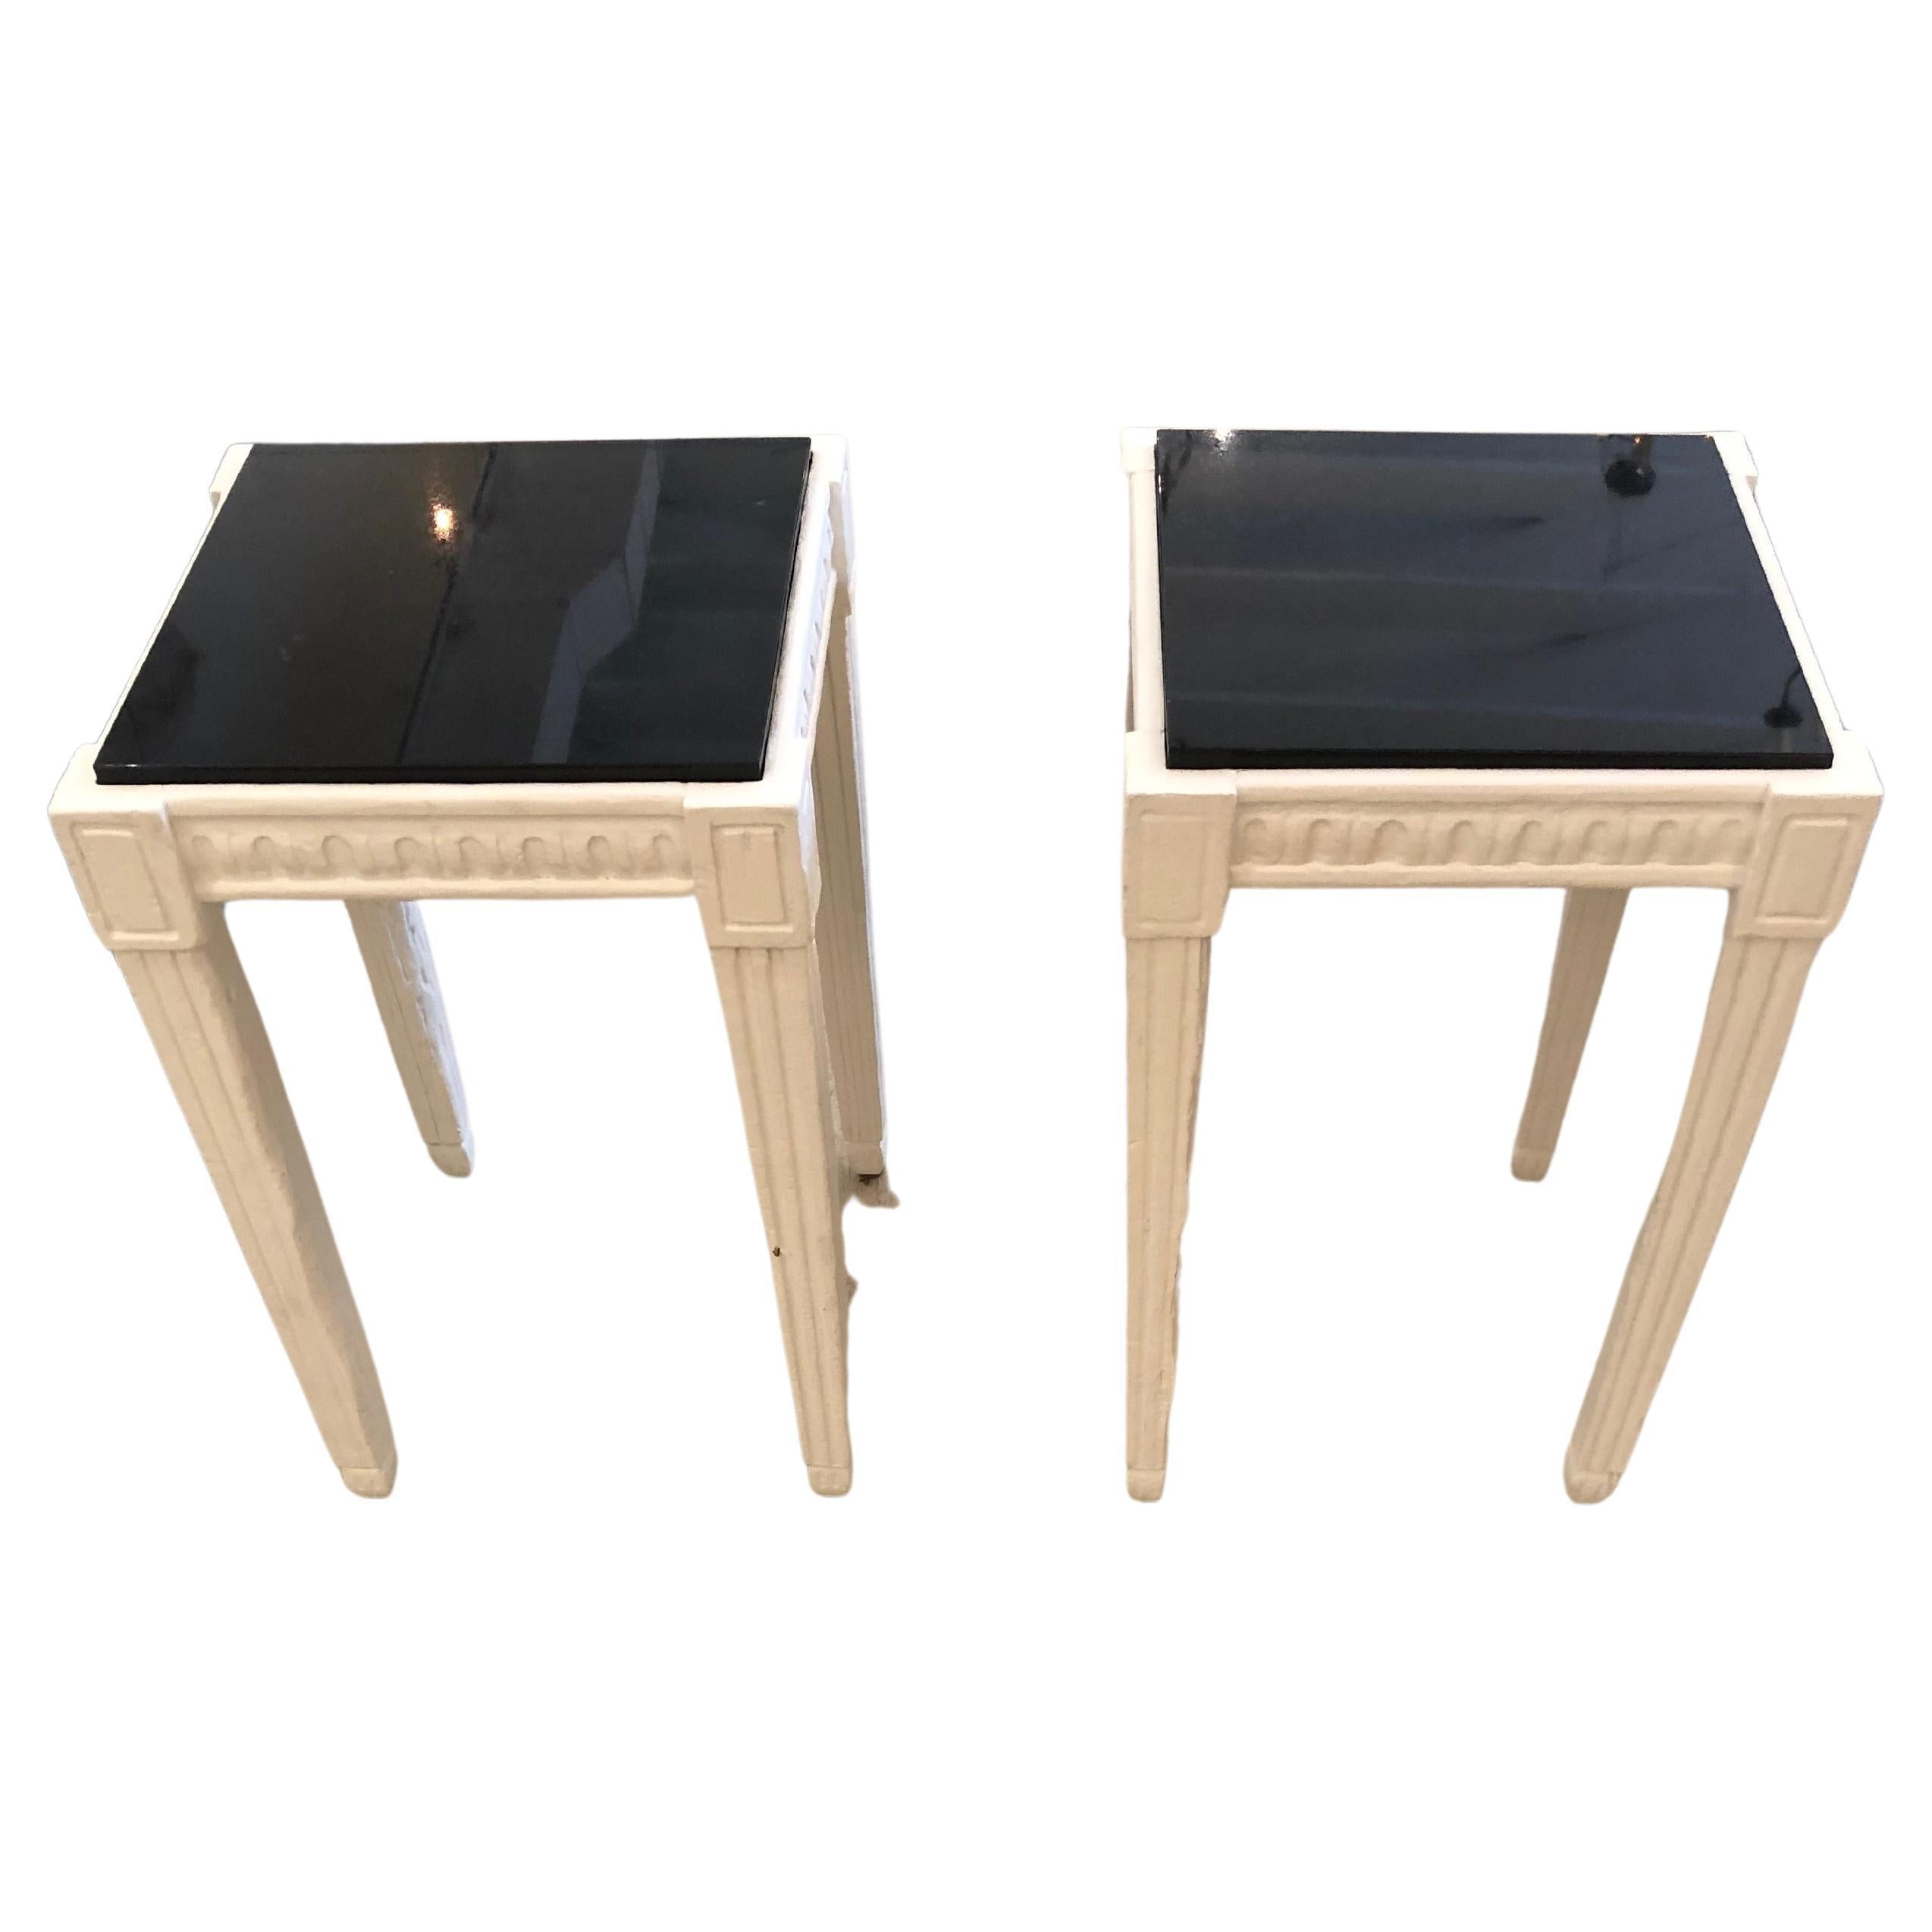 Pair of White Painted Square Vintage Side Tables with Sleek Black Marble Tops For Sale